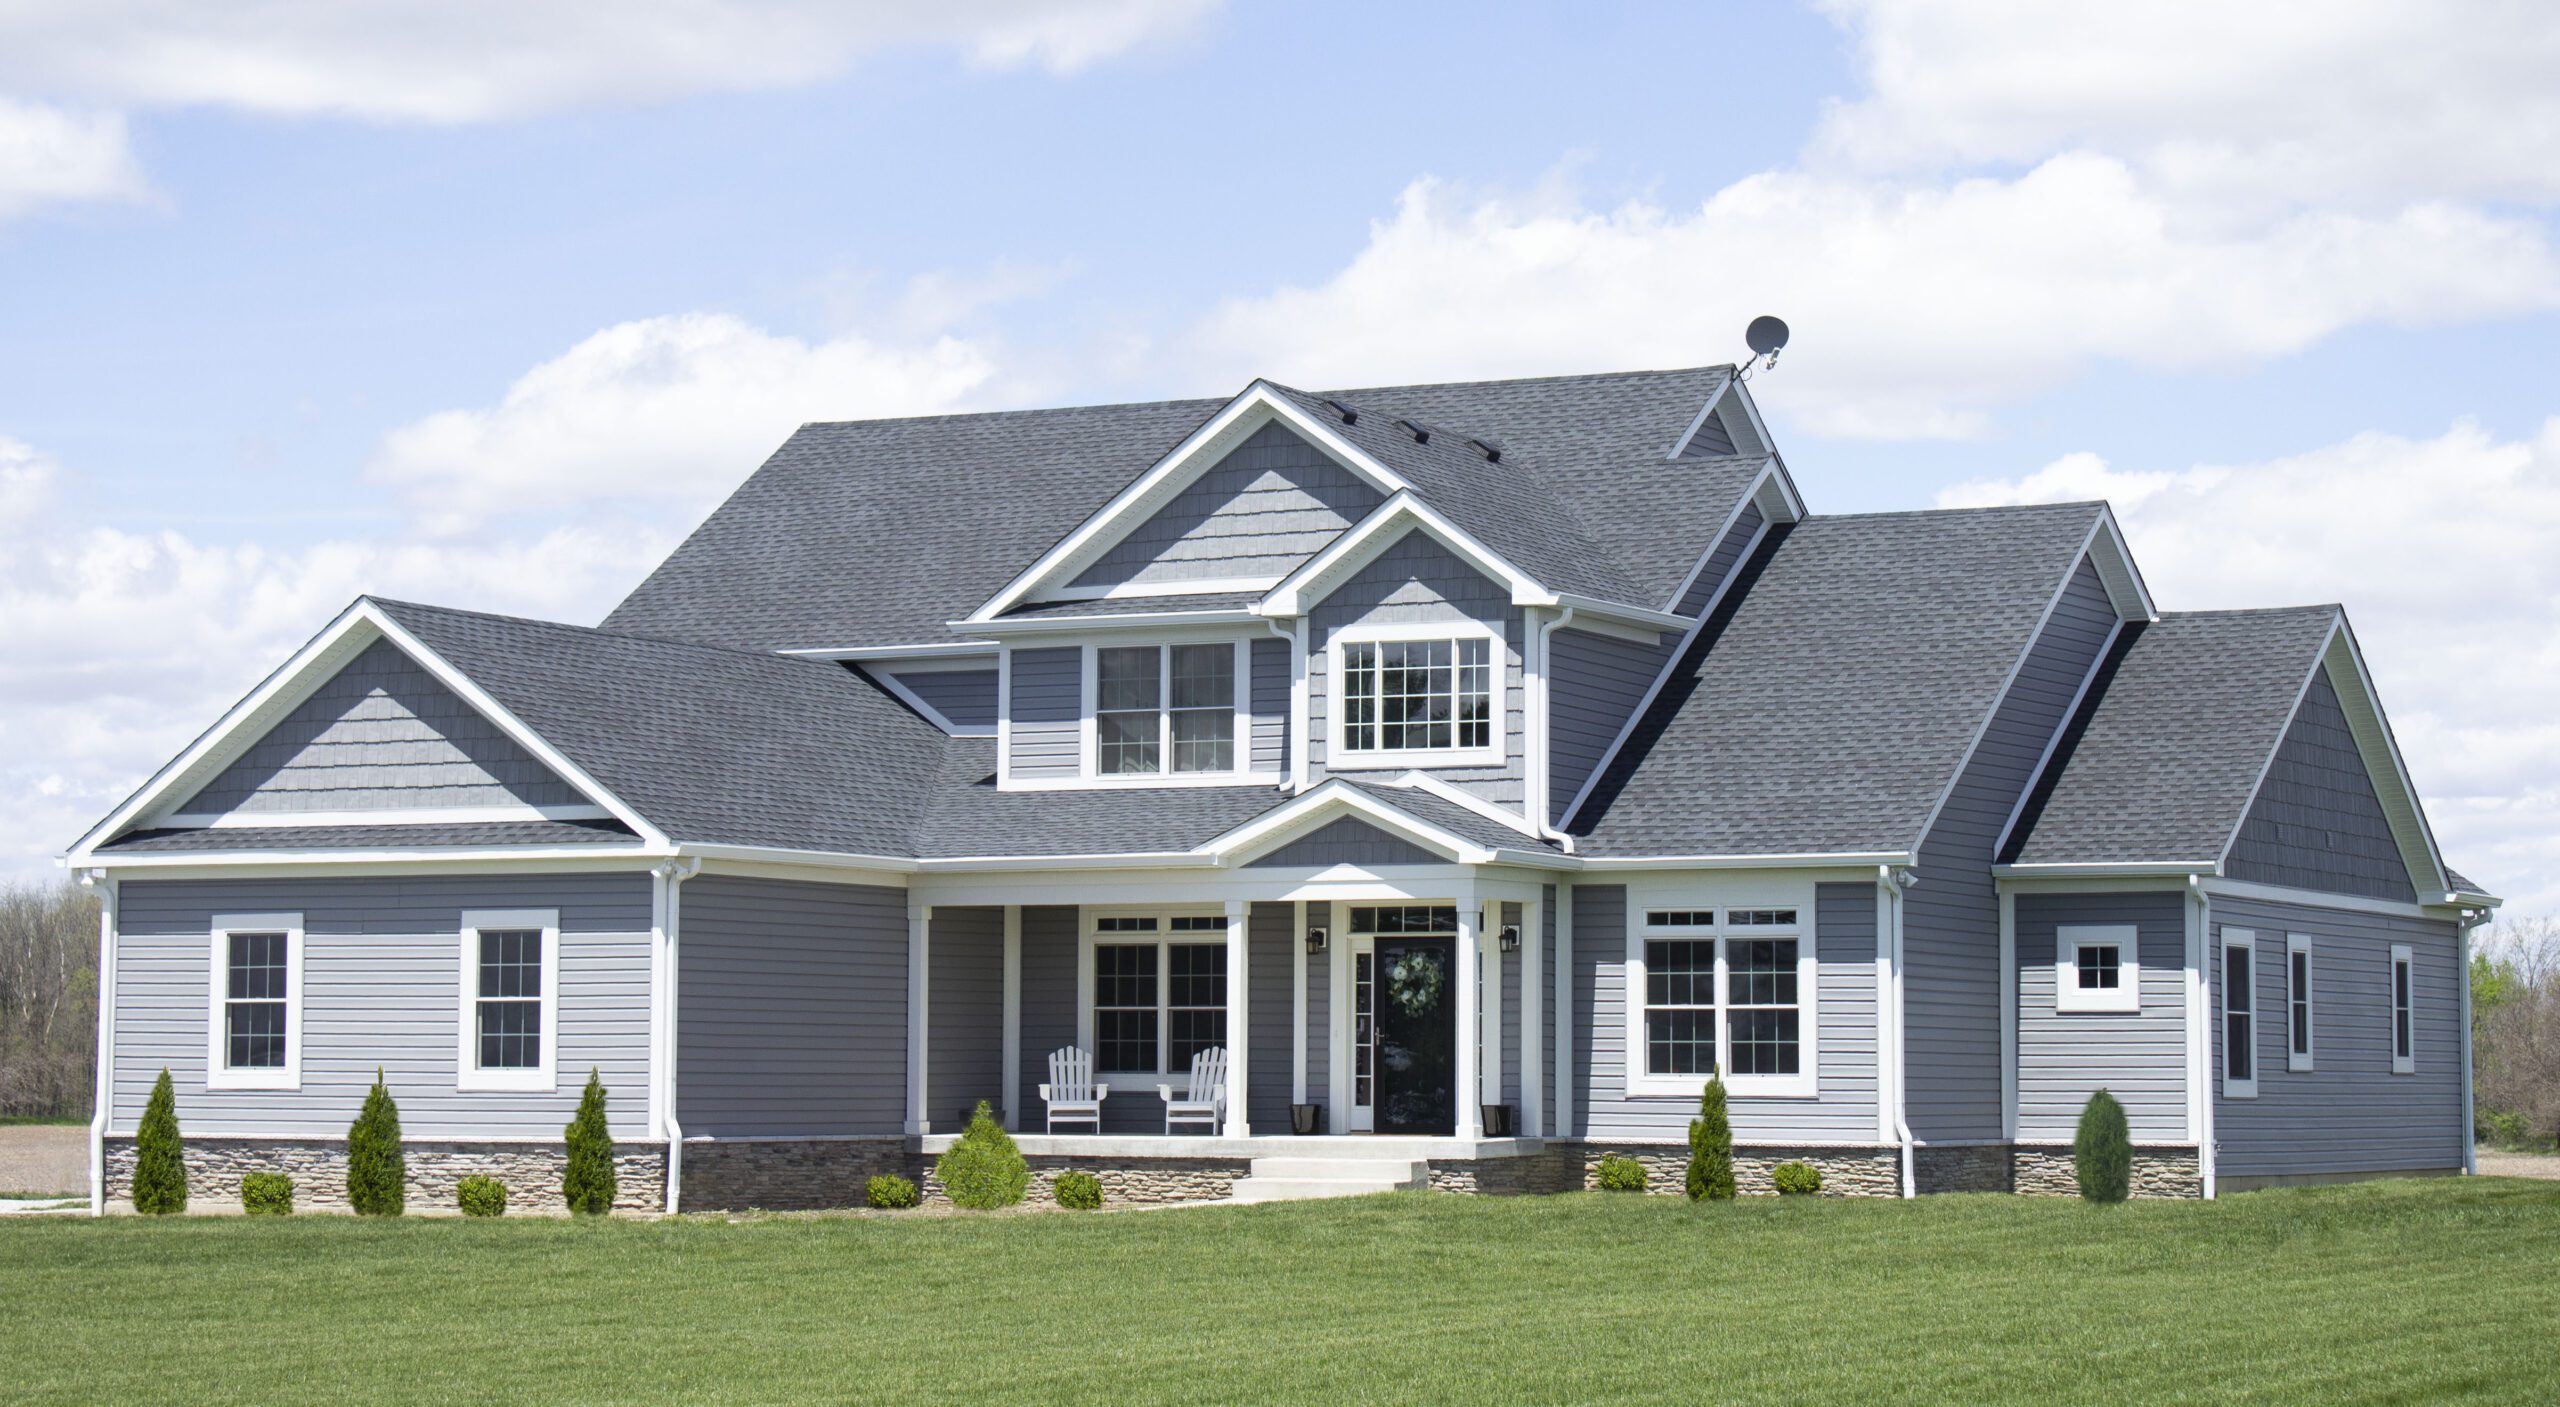 5 Things to Consider When Building a New Custom Home